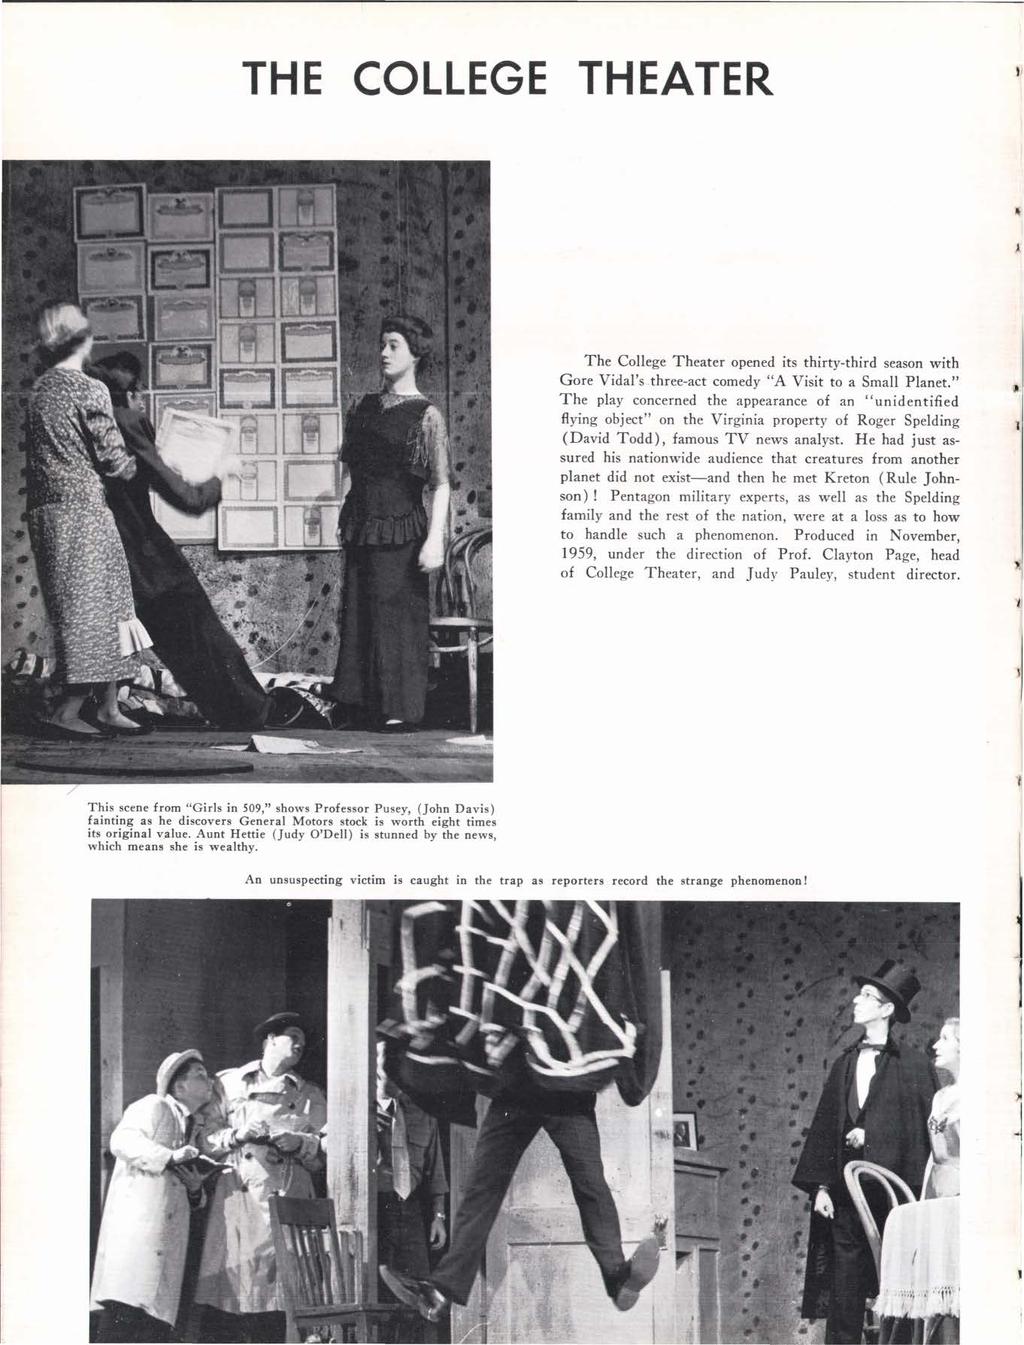 THE COLLEGE THEATER The College Theater opened its thirty-third season with Gore Vidal's three-act comedy "A Visit to a Small Planet.